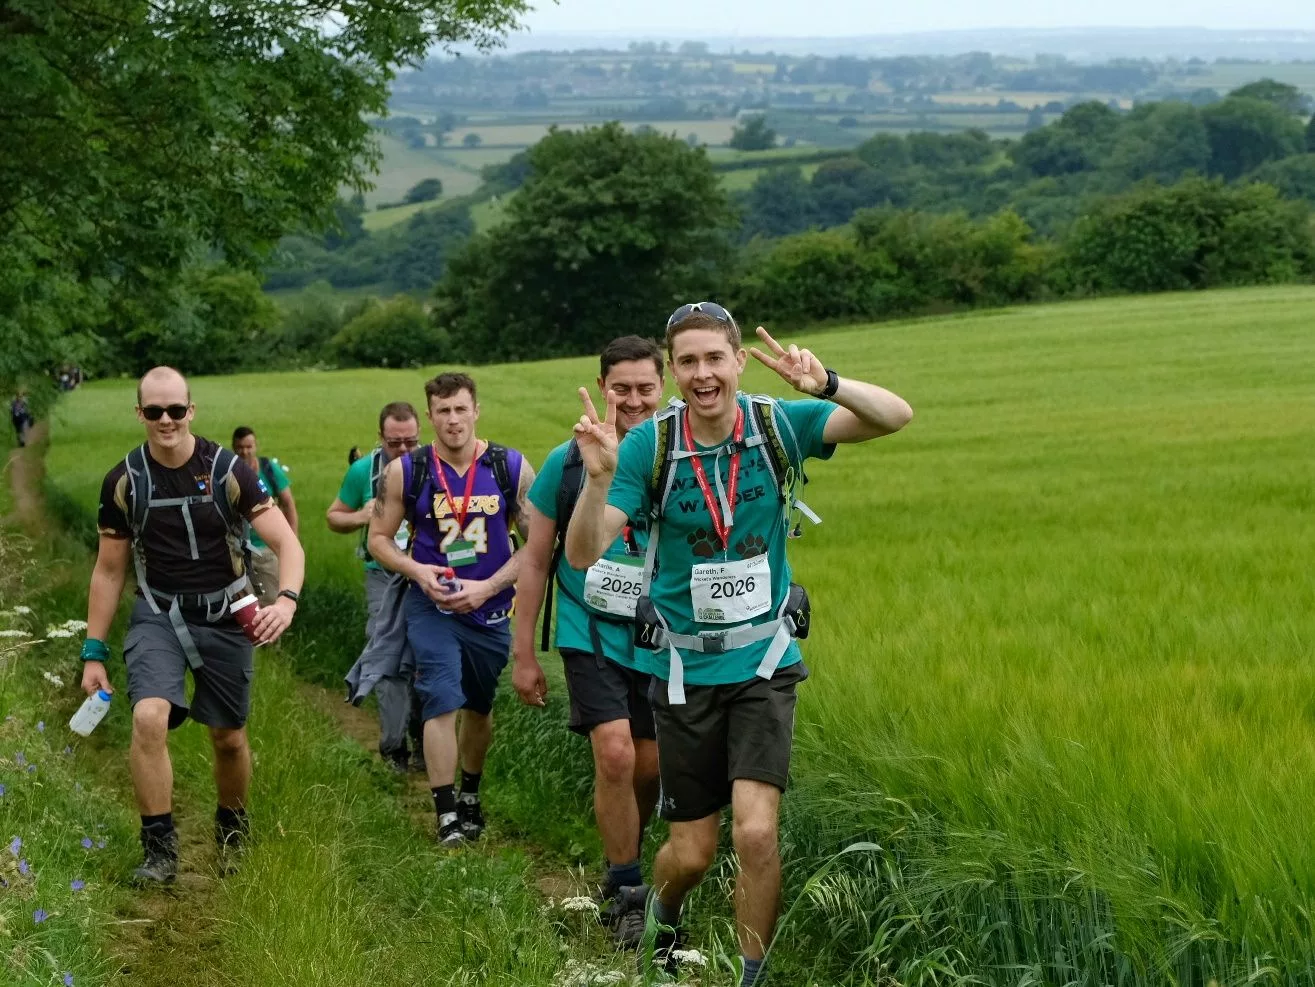 A group of hikers give the thumbs up for the camera with the North Downs countryside in the background.